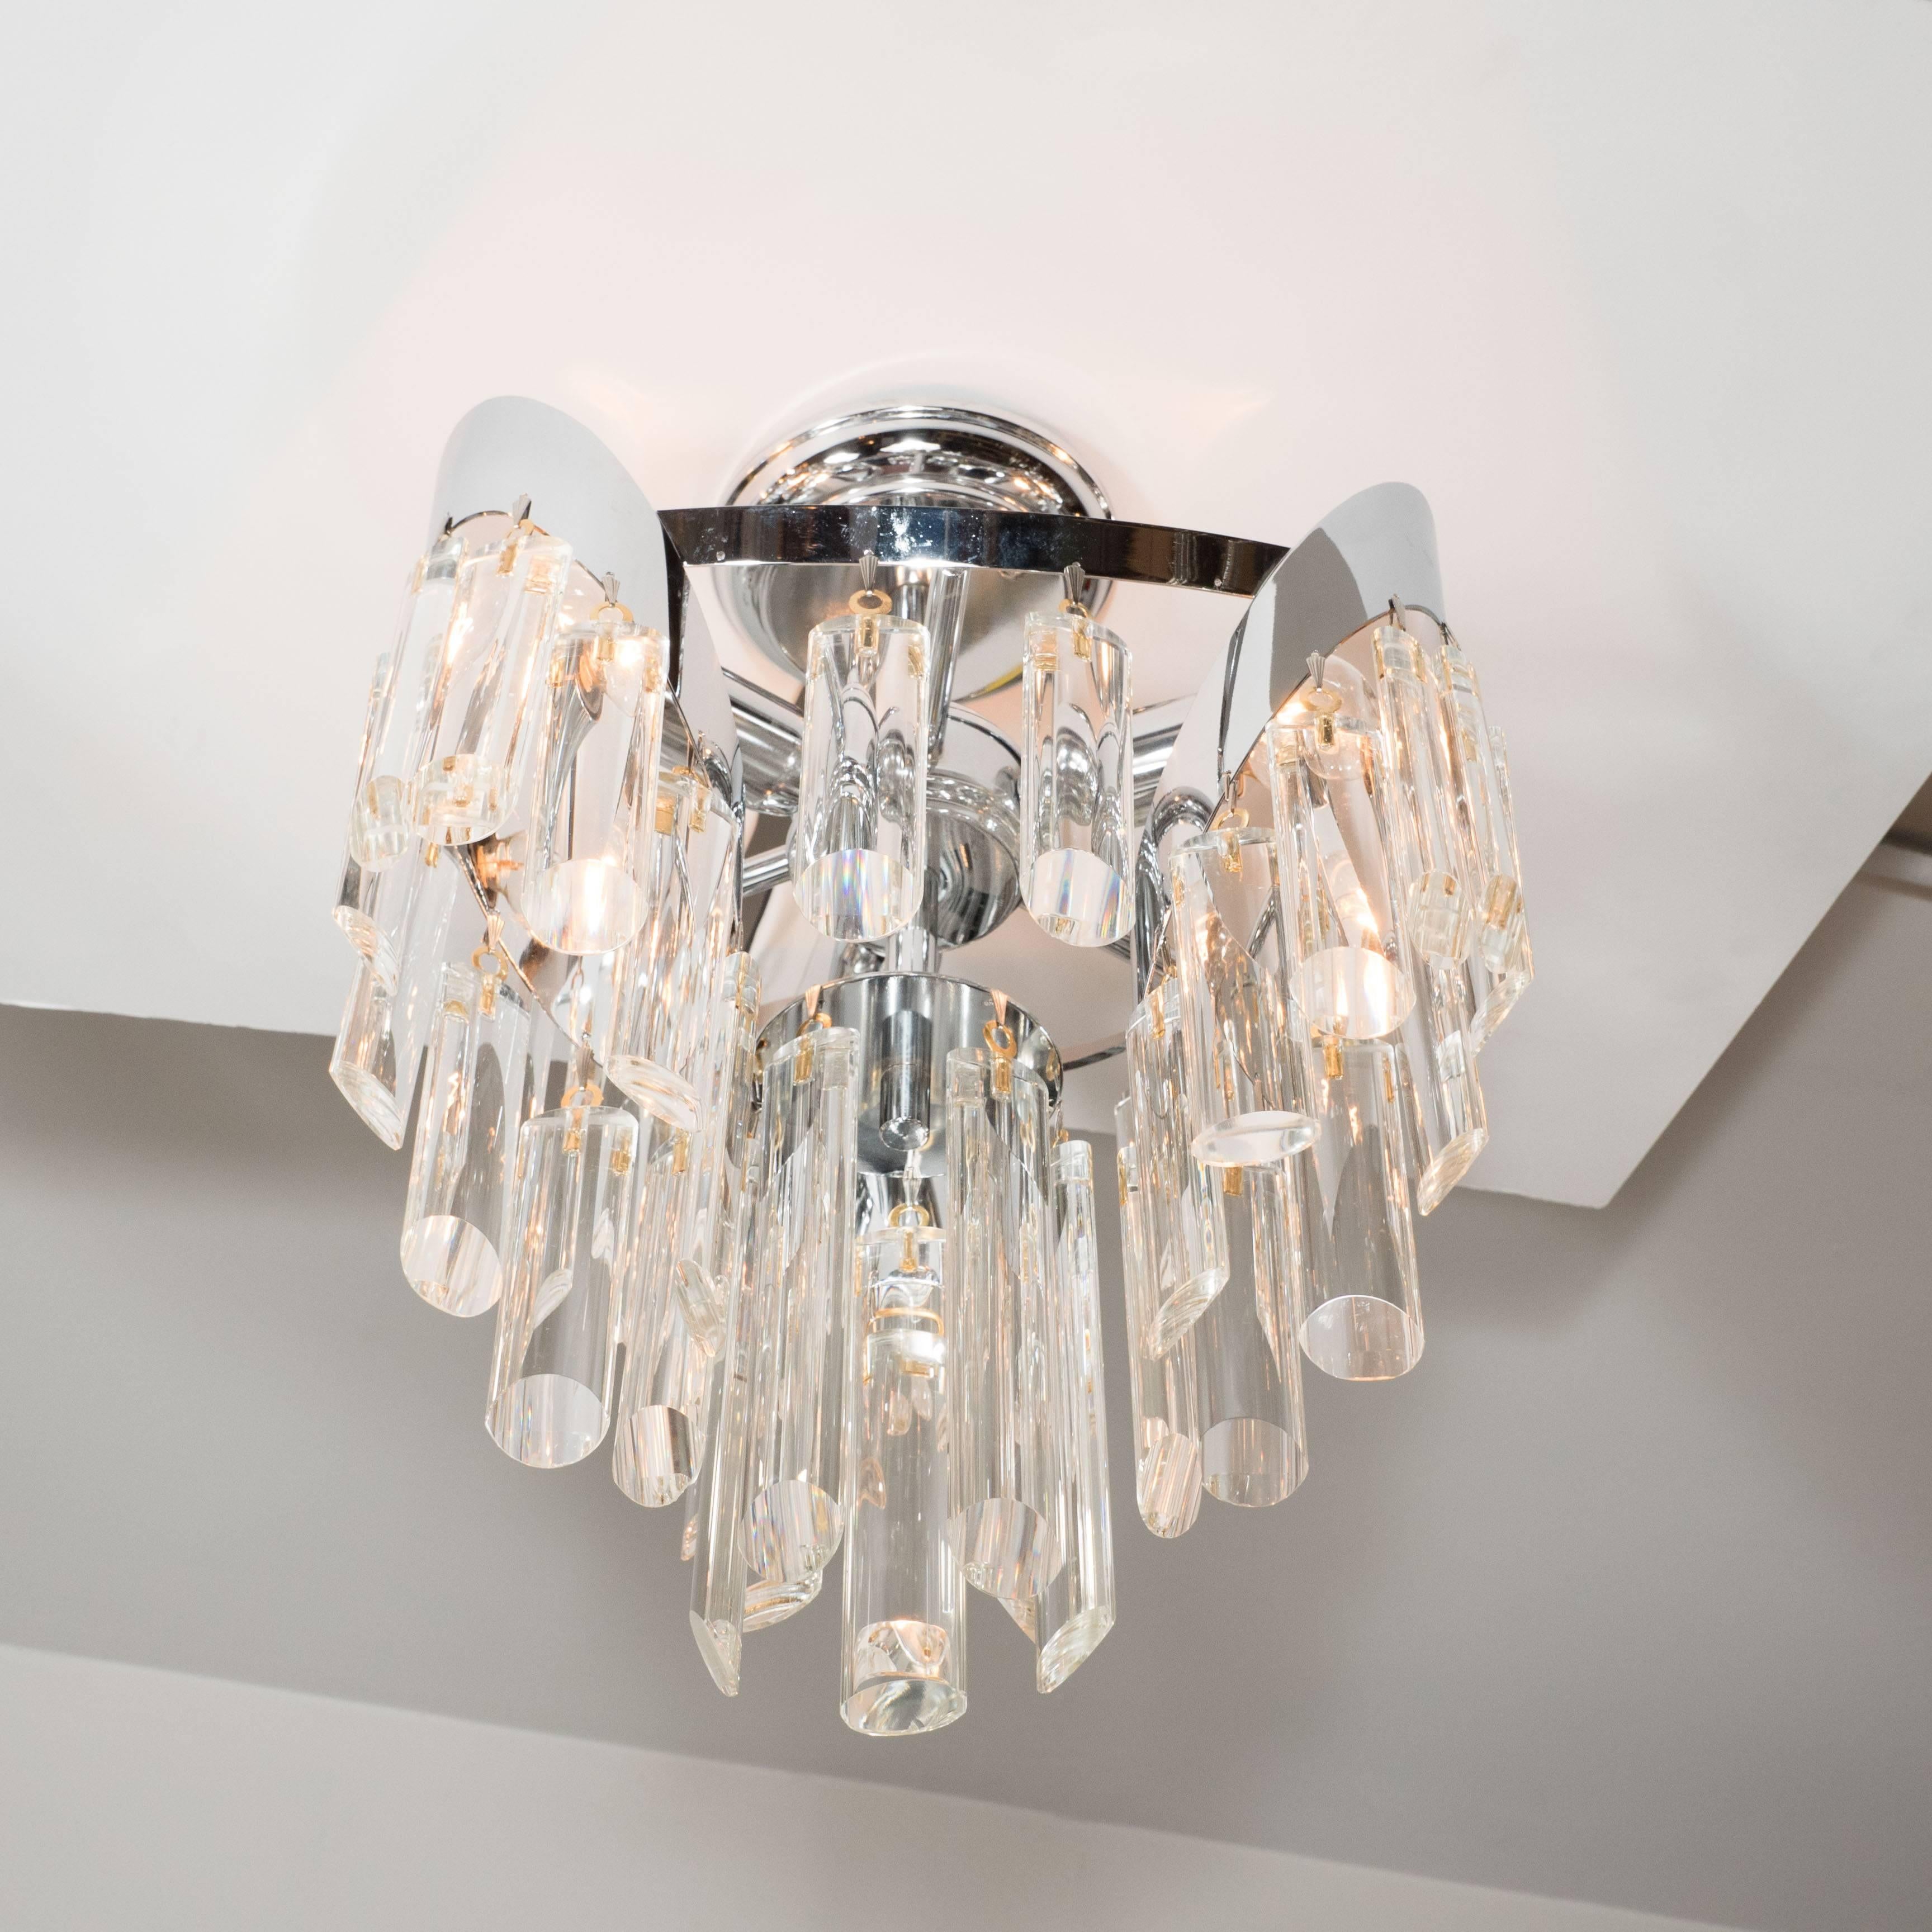 This elegant Mid-Century Modern chandelier was realized by the storied Austrian lighting atelier Lobmeyr, circa 1979. It features an abundance of bias cut crystal rods suspended from a nickel frame. This chandelier infuses a classical sensibility